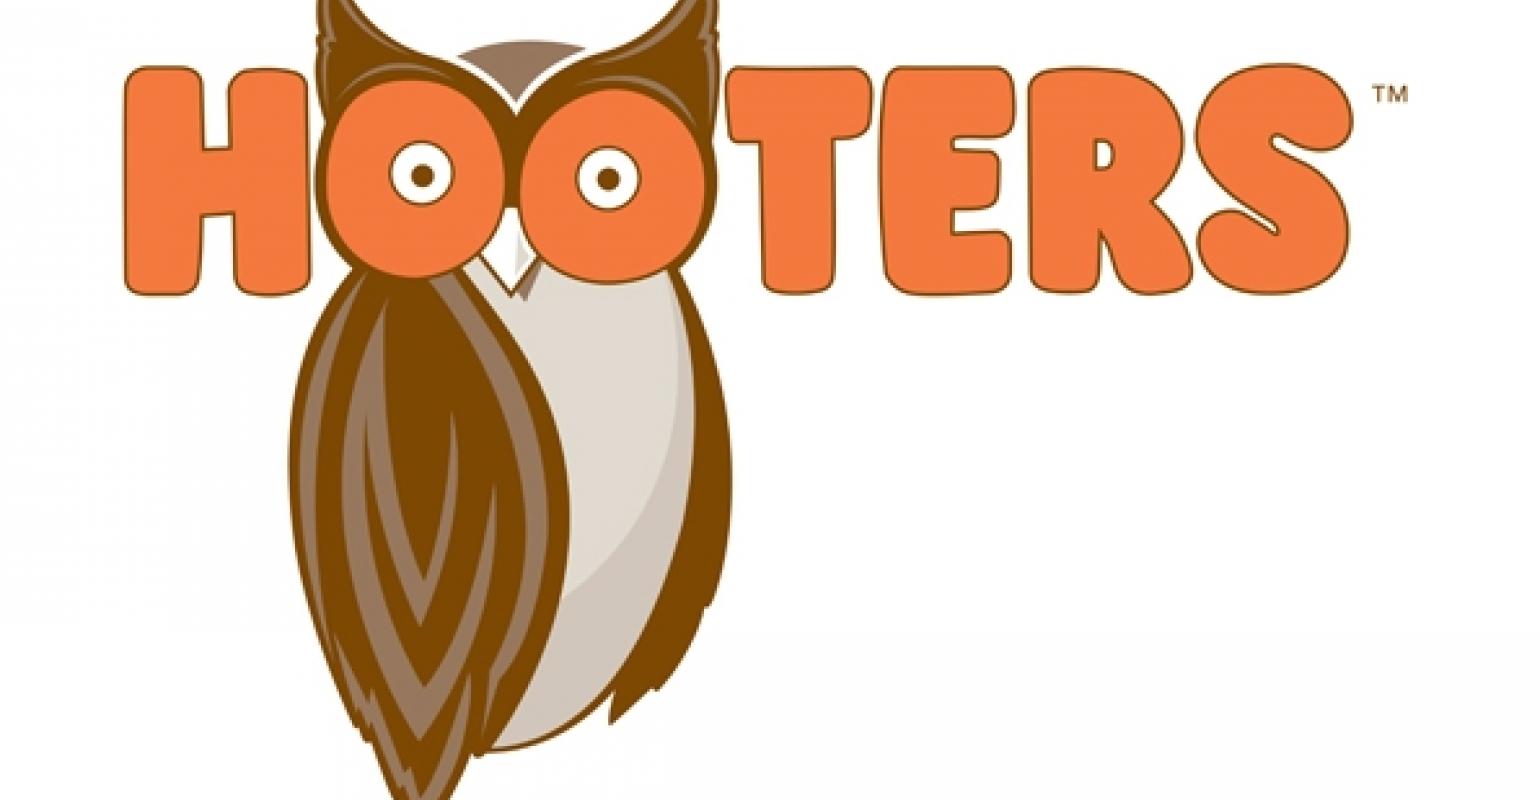 Hooters Names Bruce Skala chief marketing officer